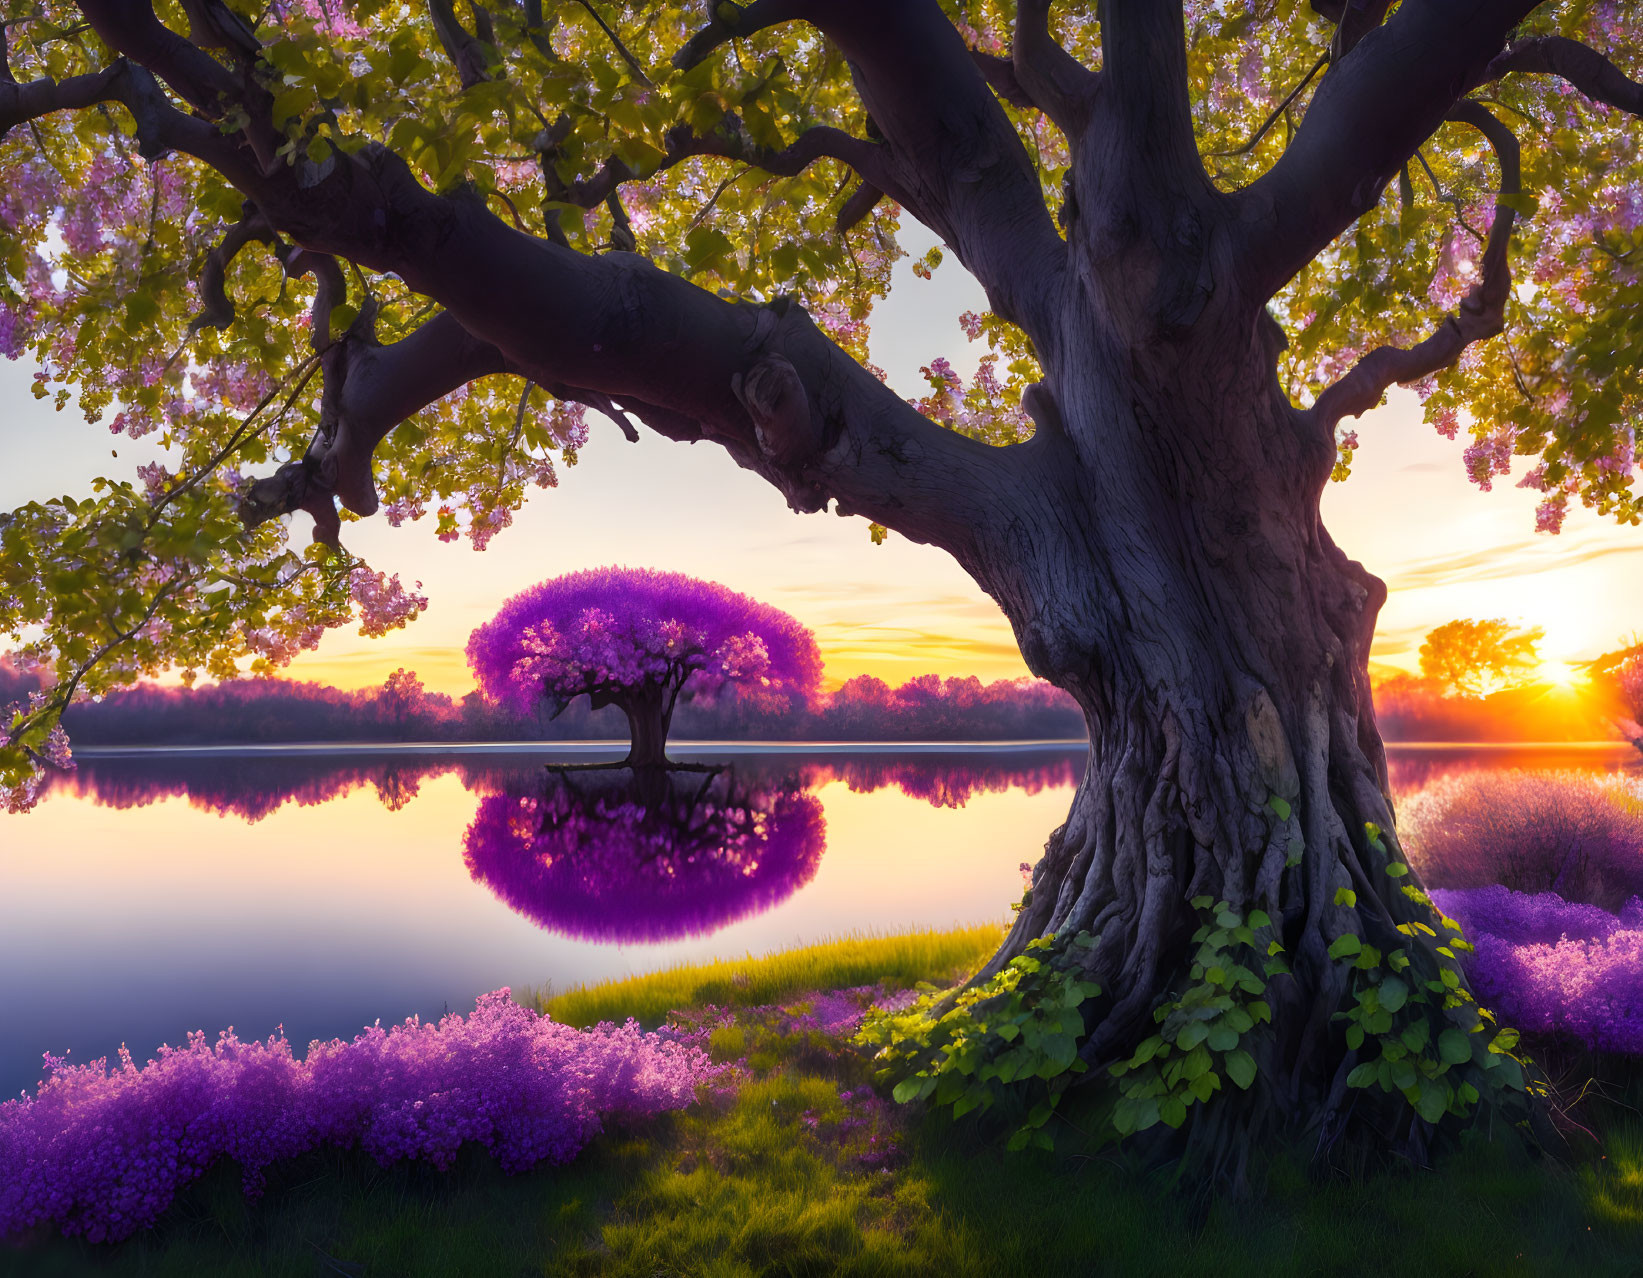 Tranquil sunset landscape with majestic tree, purple blossoms, reflective lake